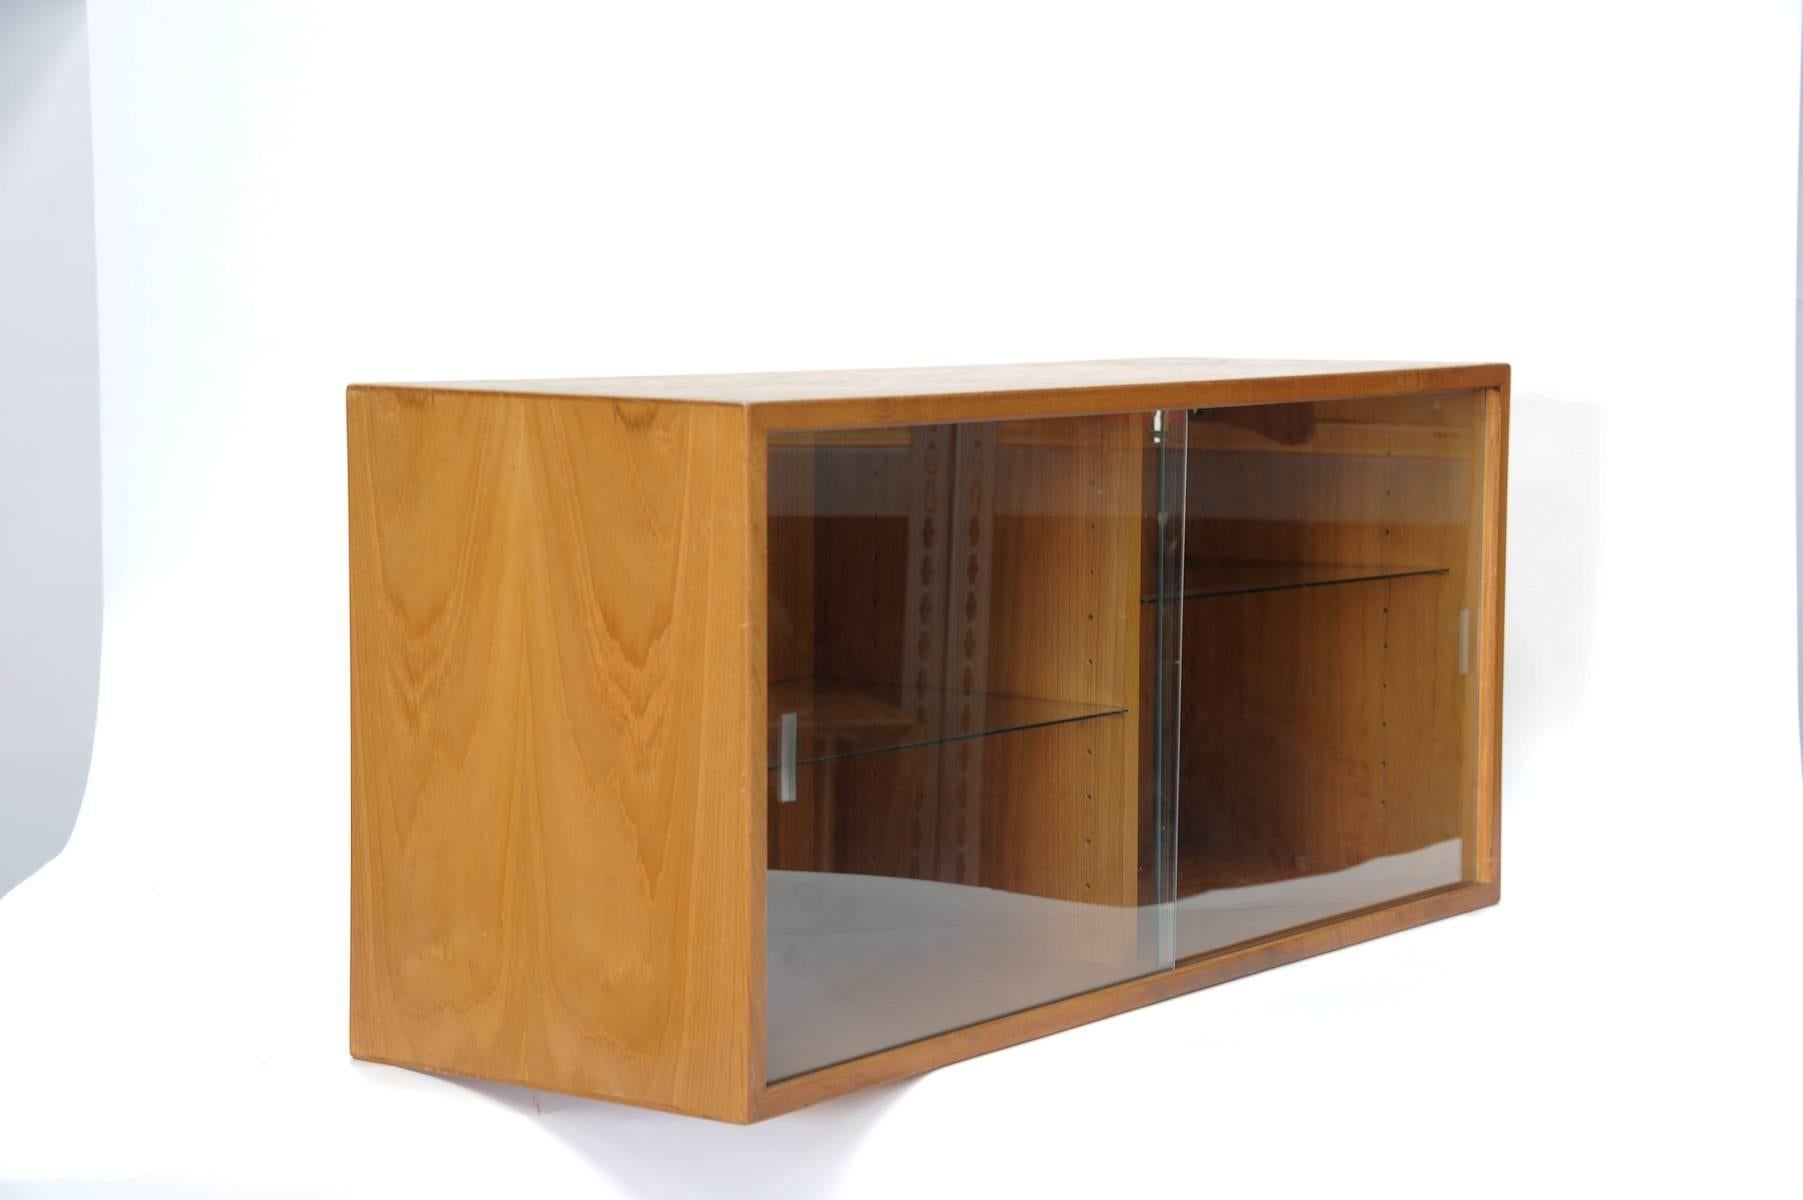 A handsome apir of Danish Floating Wall hang bookcases.